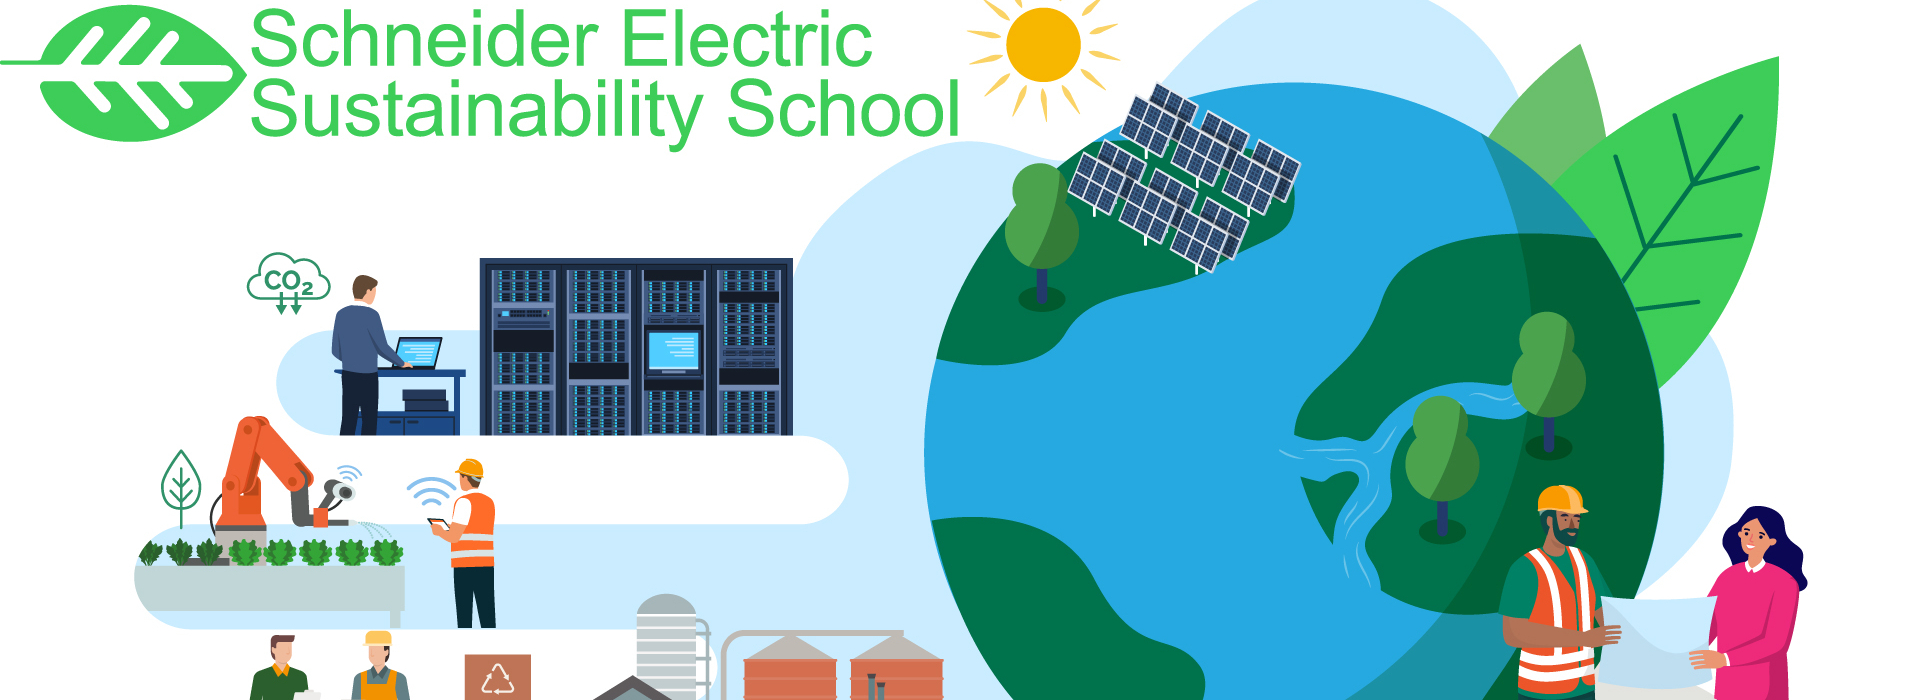 Schneider Electric’s First Sustainability School Opens for Enrolment